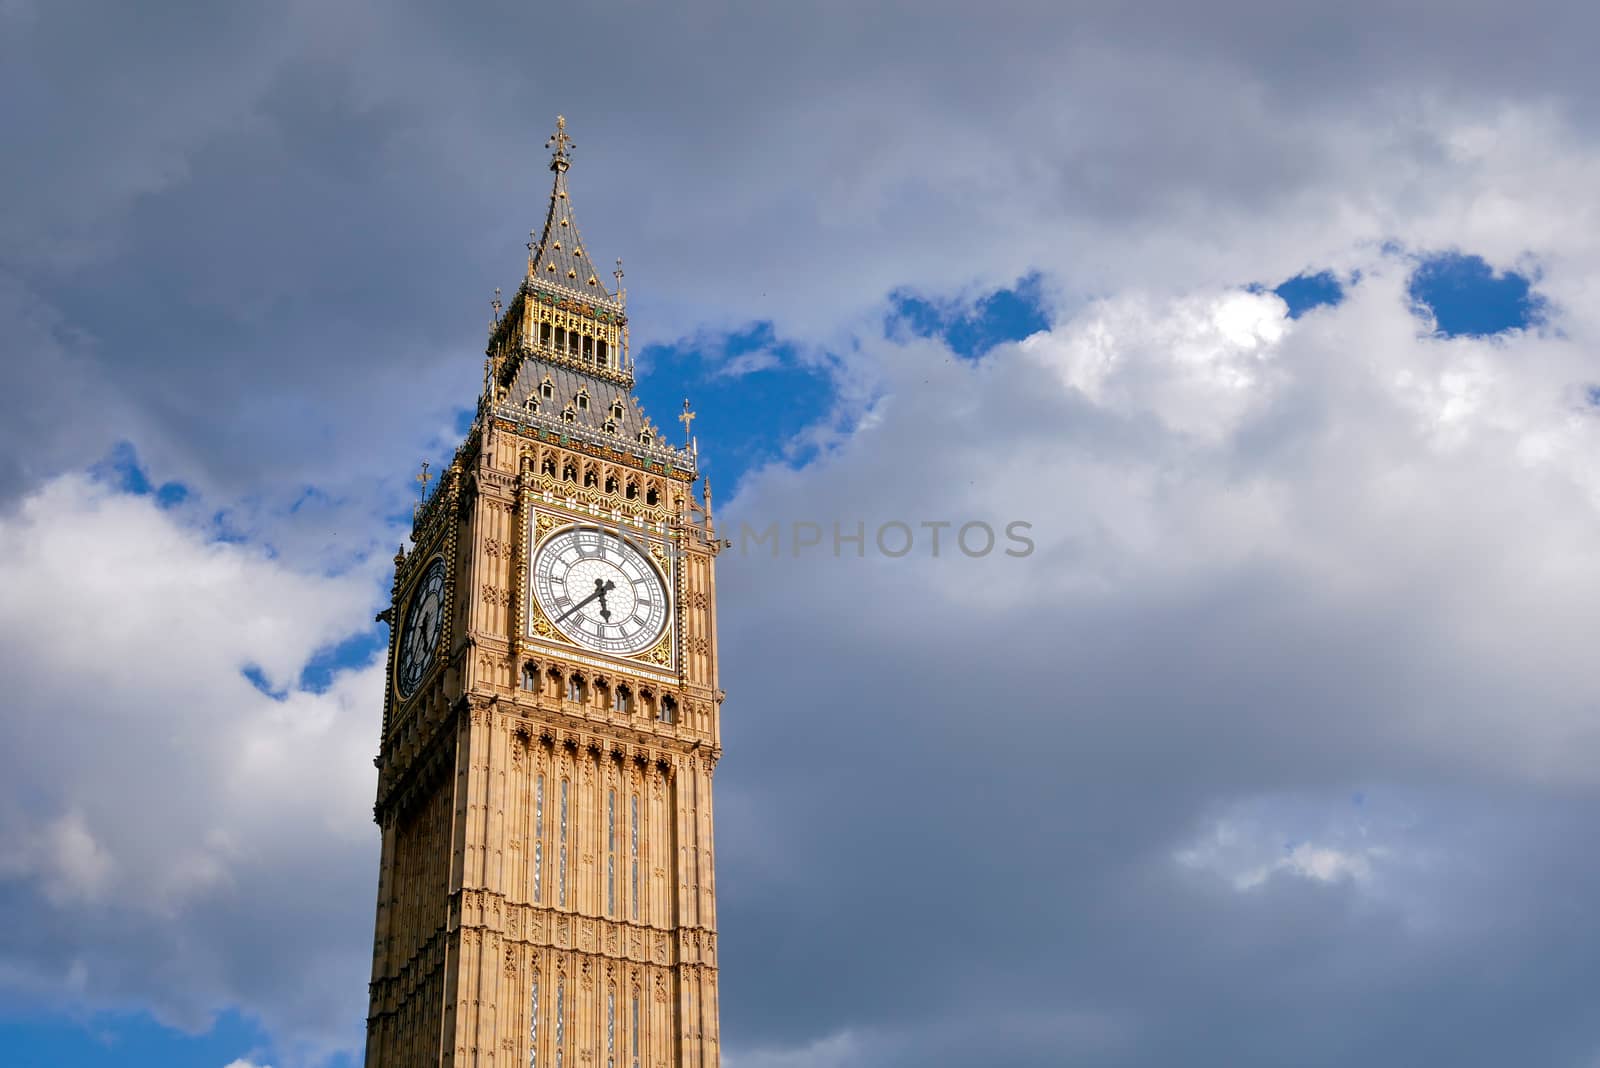 Big Ben and Westminster abbey in London, England by Alicephoto